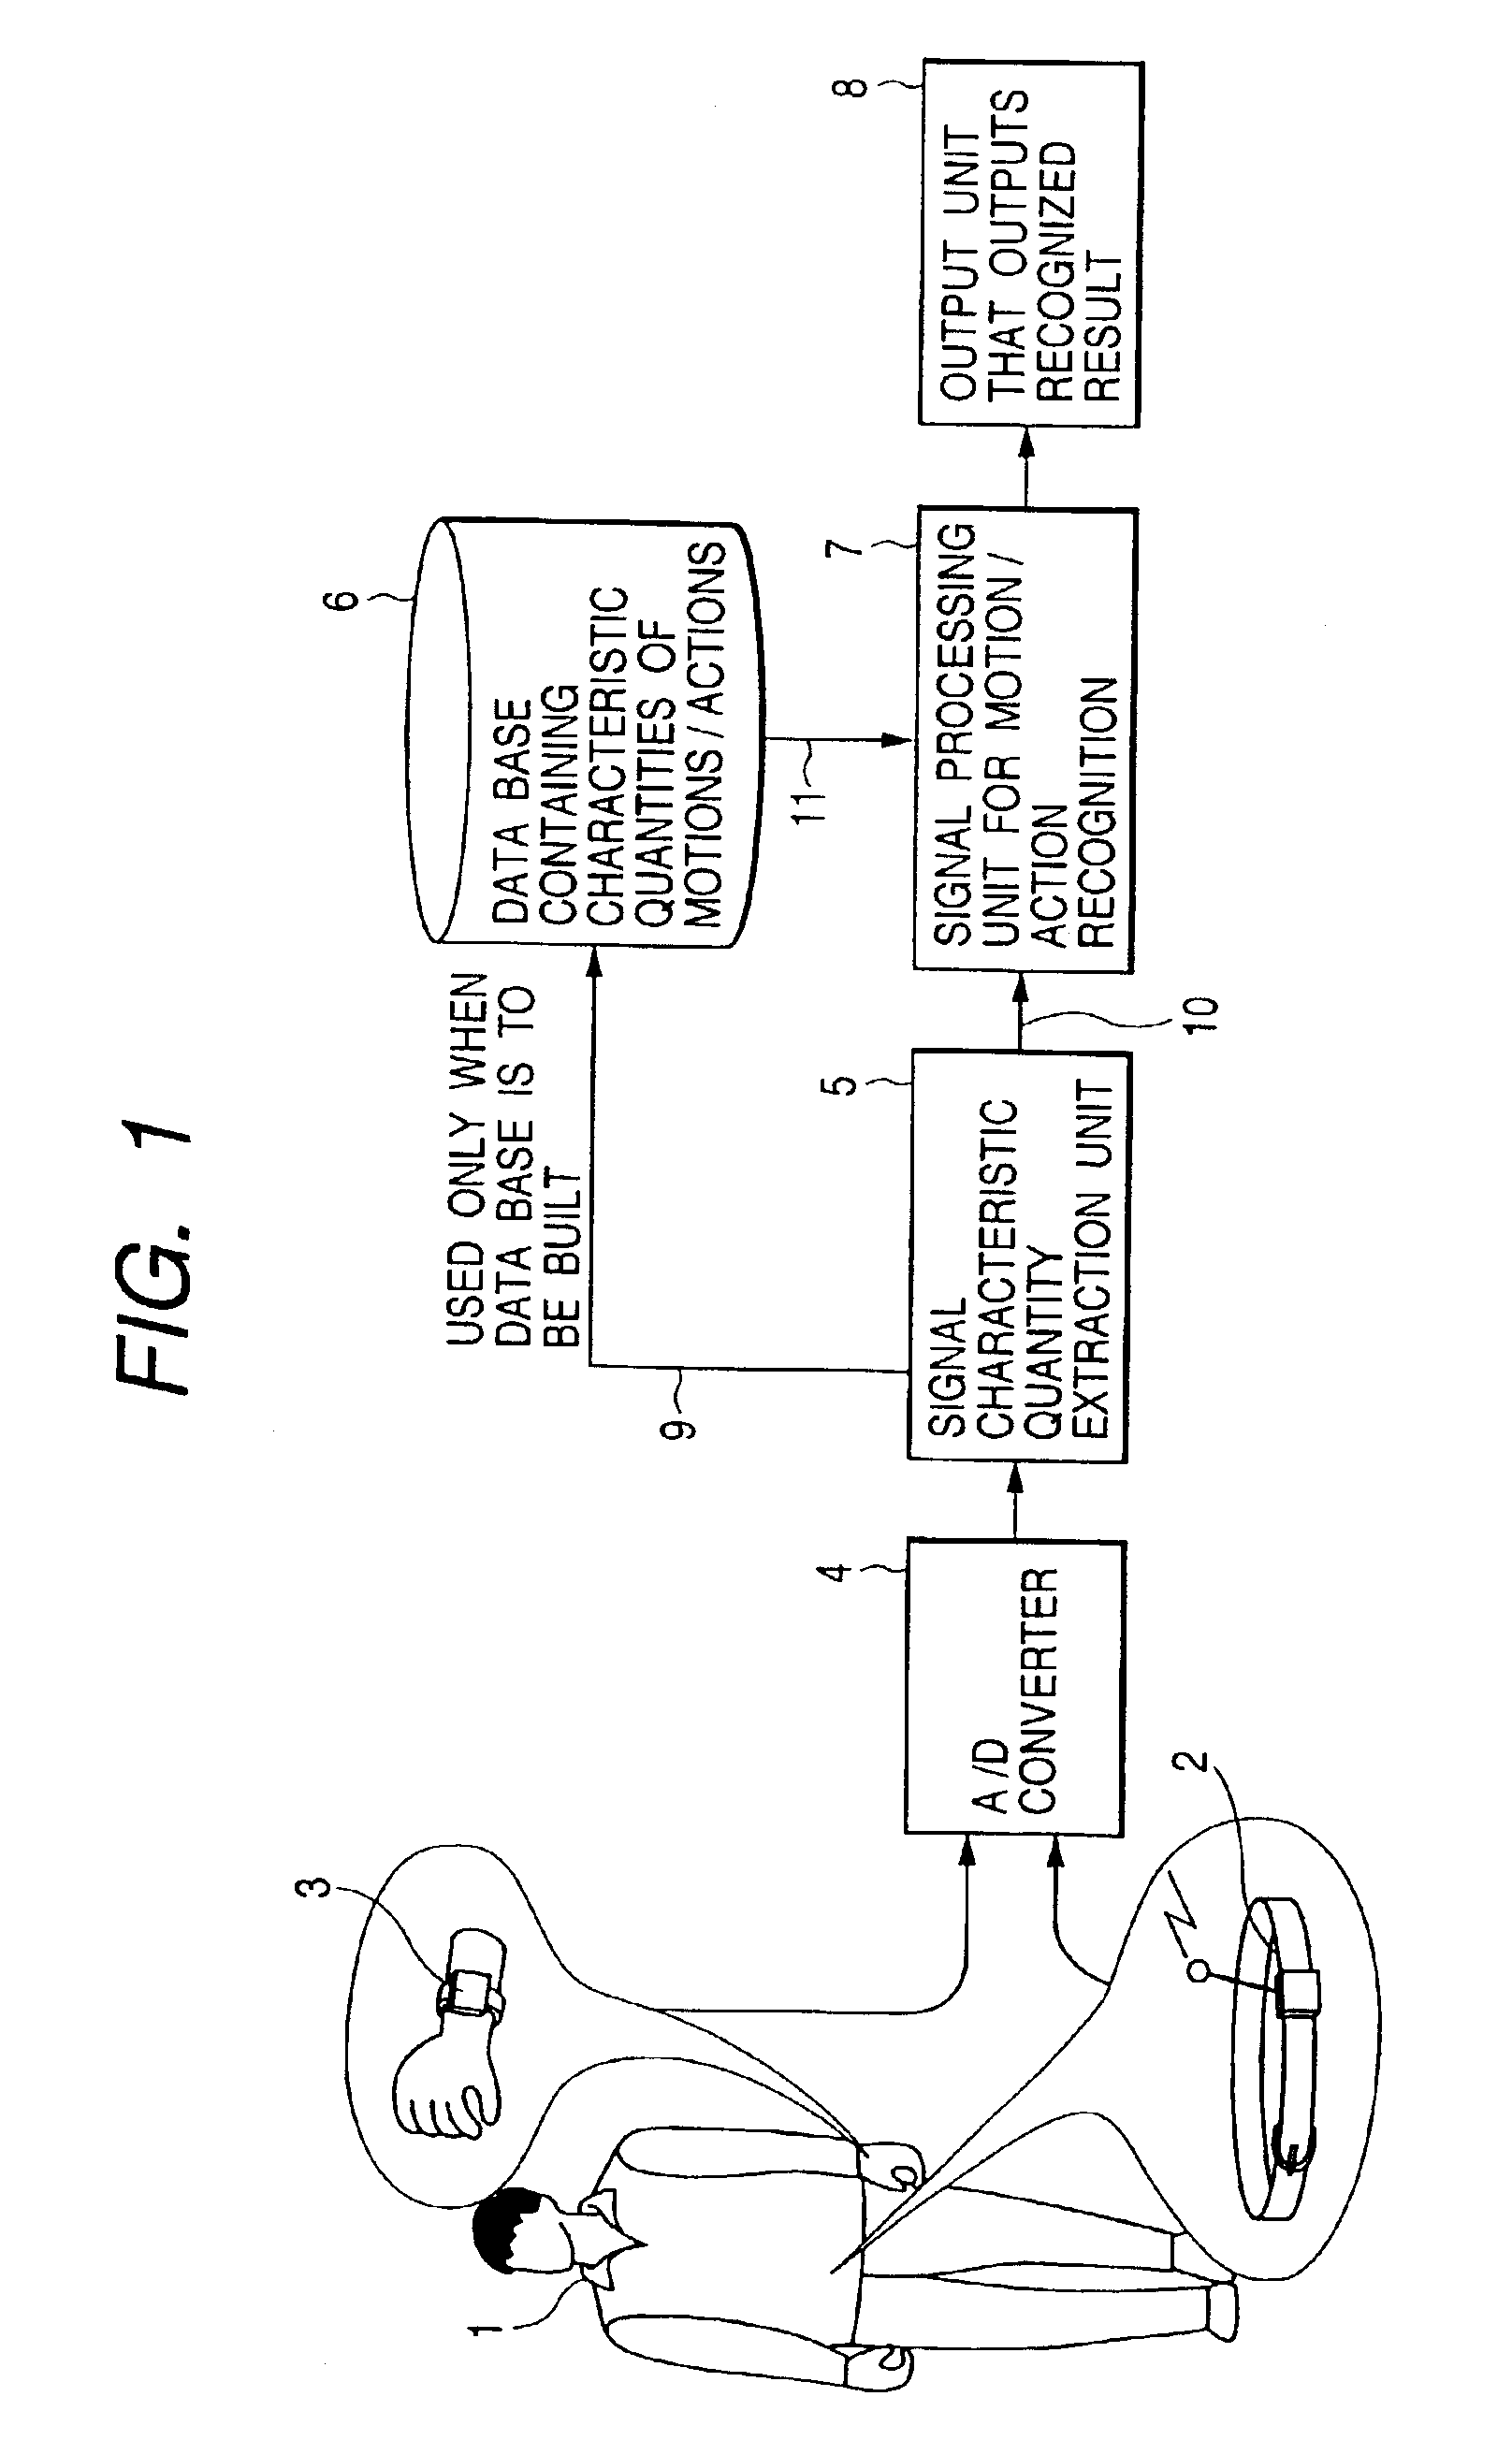 Method, apparatus and system for recognizing actions